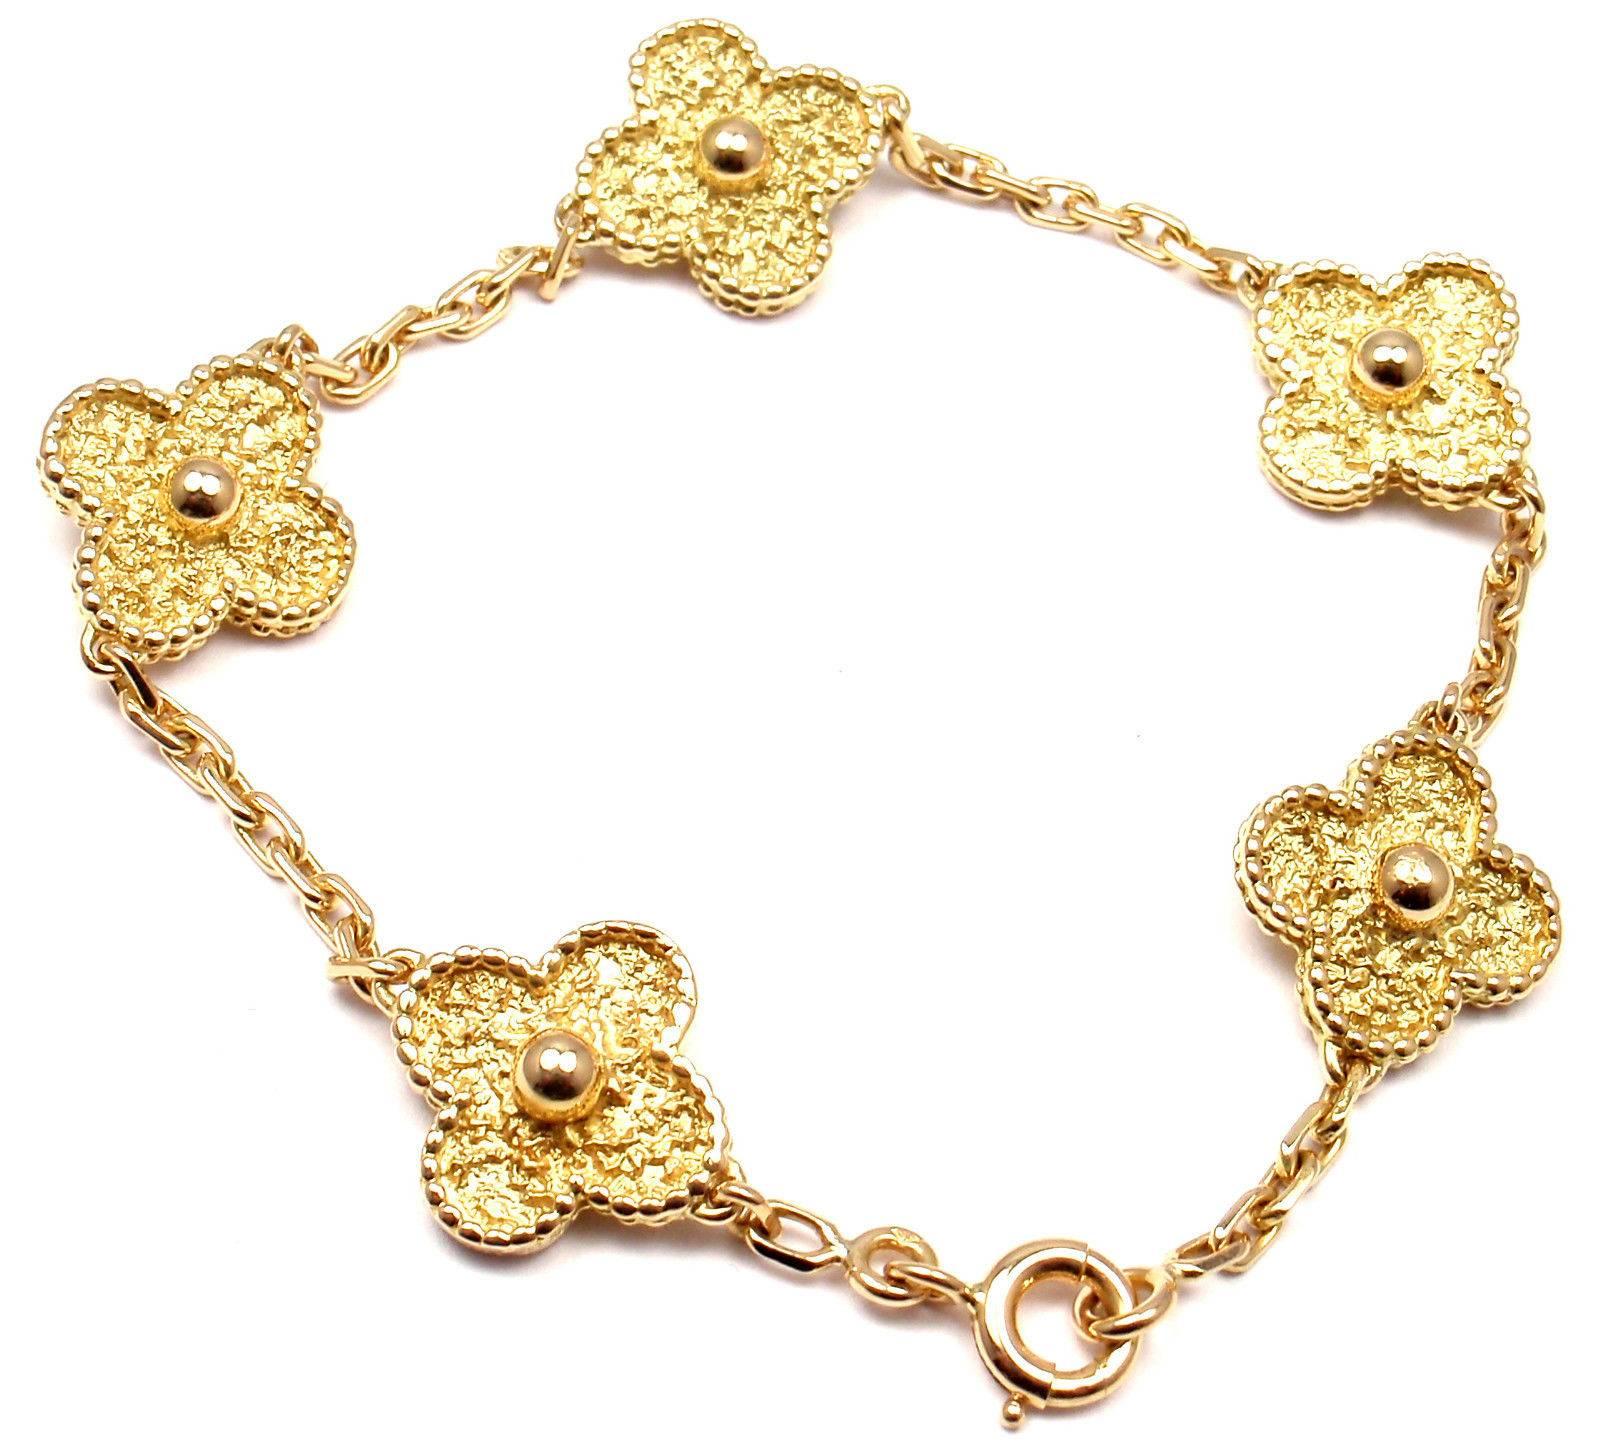 18k Yellow Gold Vintage Alhambra Yellow Gold Bracelet by Van Cleef & Arpels. 
With five Motifs made out of 18k Yellow Gold.

Details:
Length: 7